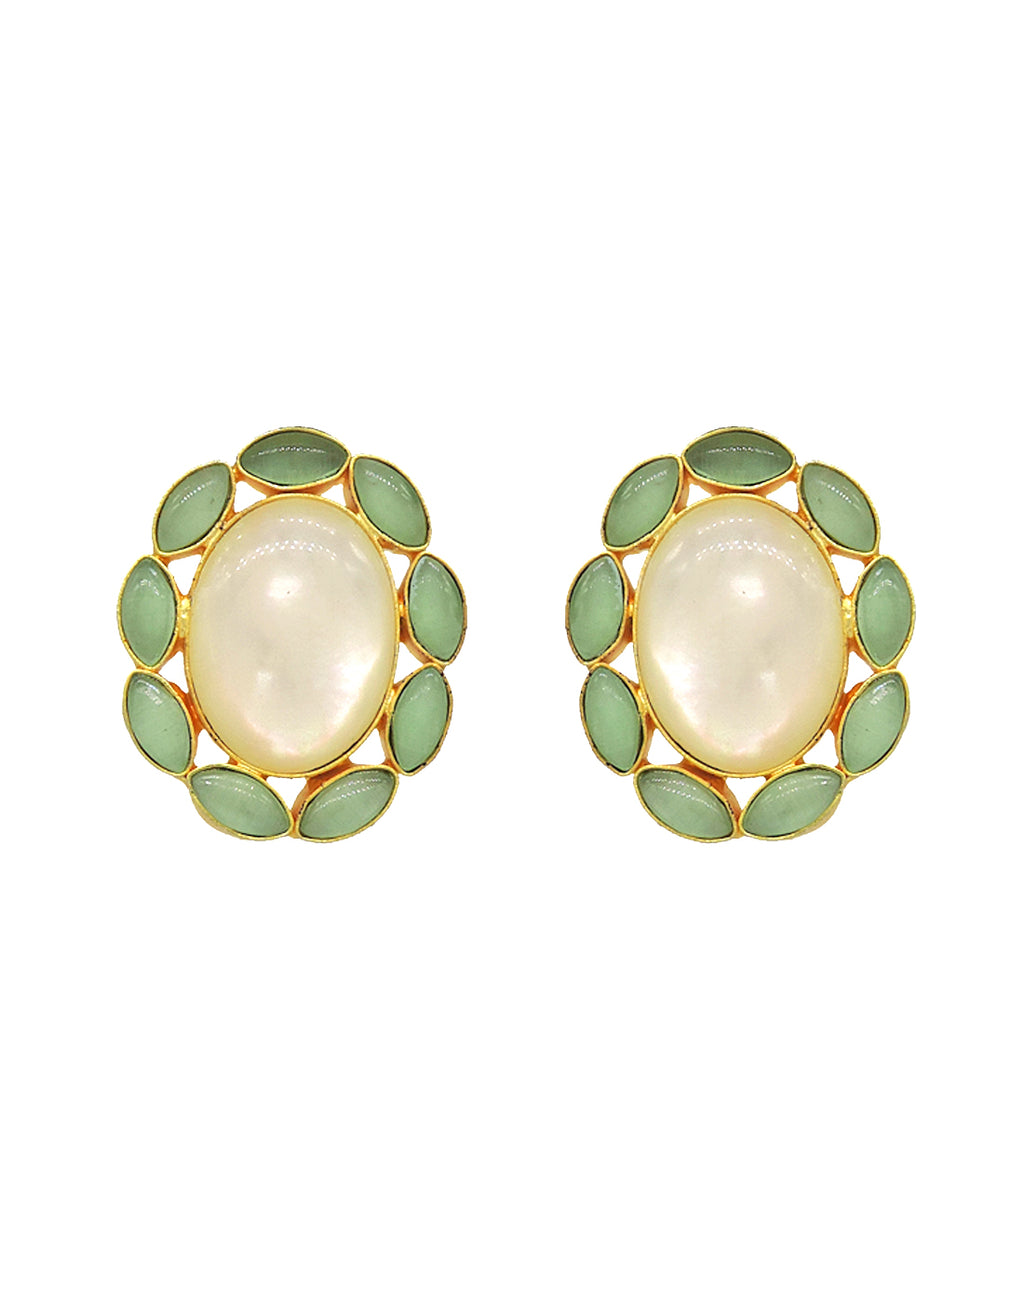 Oval Pearl Earrings - Statement Earrings - Gold-Plated & Hypoallergenic - Made in India - Dubai Jewellery - Dori